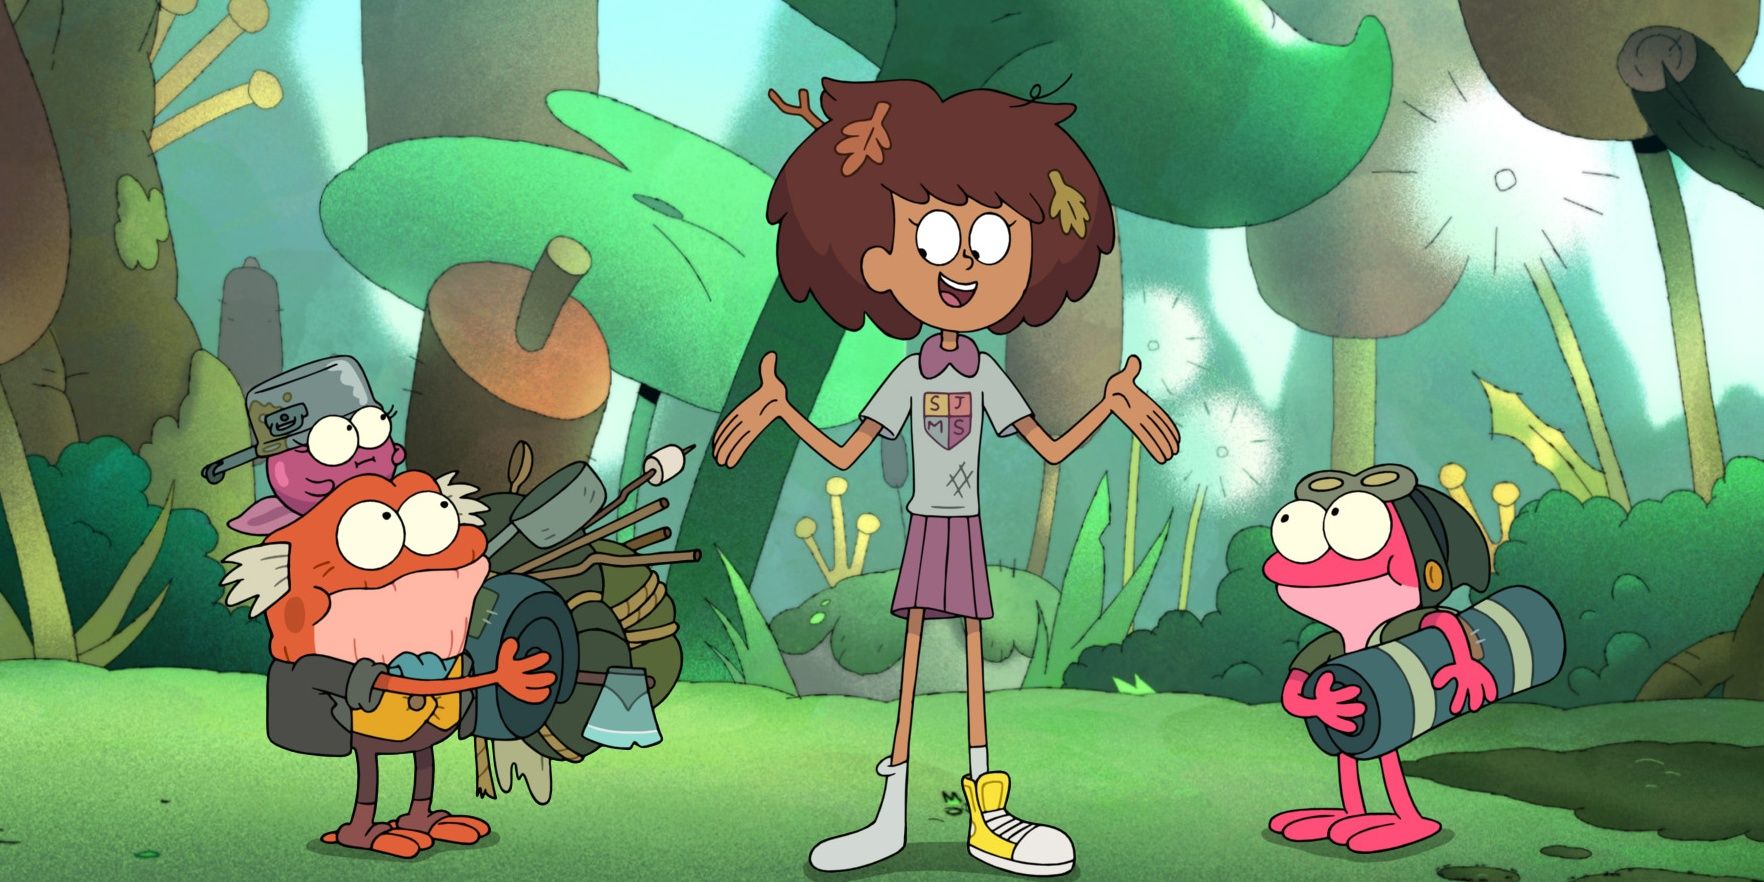 Anne, Sprig, and Hop Pop From Amphibia